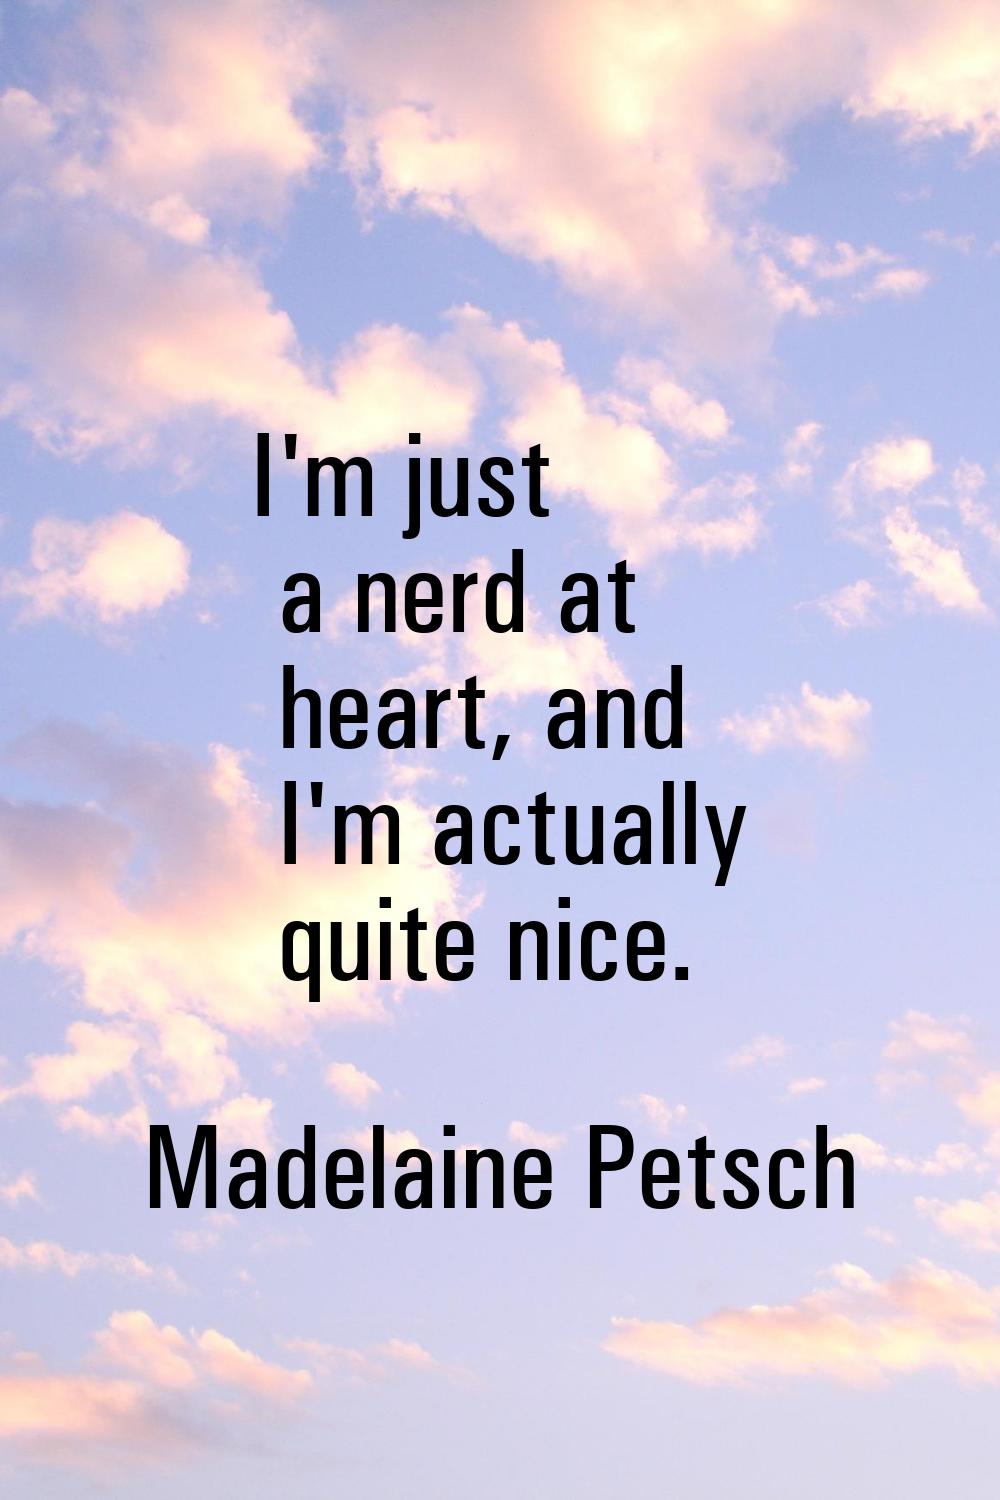 I'm just a nerd at heart, and I'm actually quite nice.